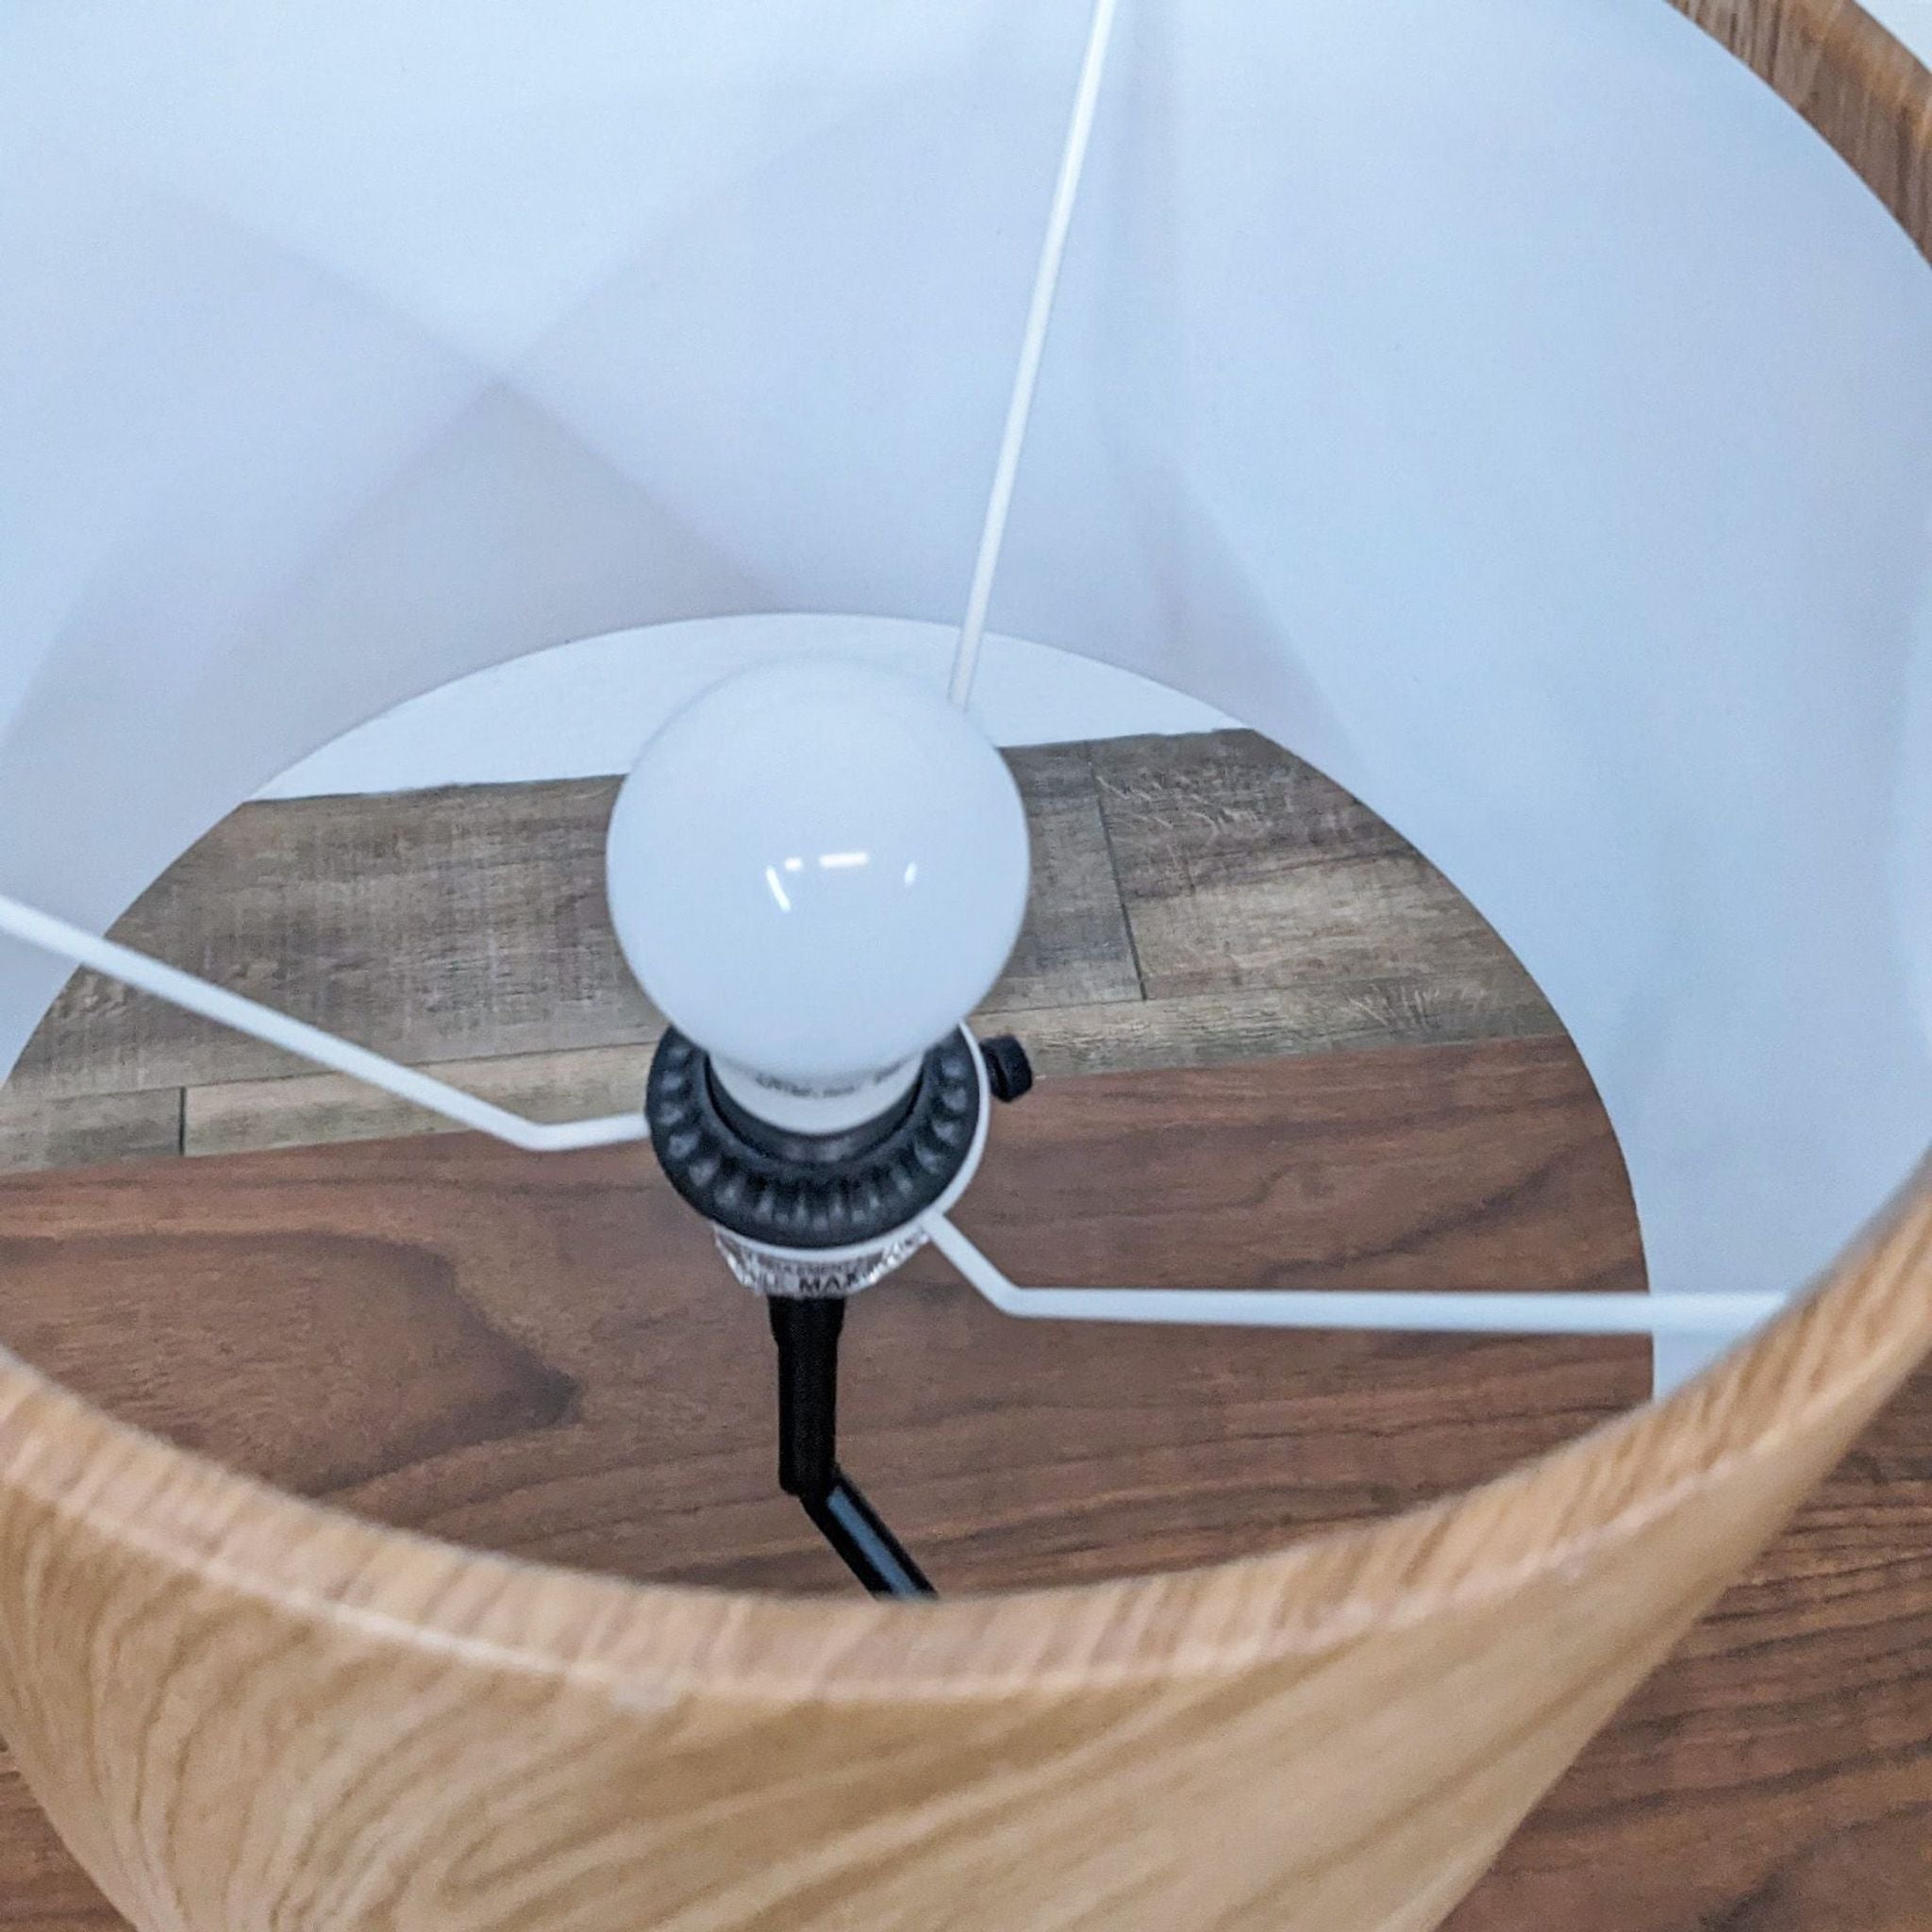 Alt text 2: Close-up of a Reperch table lamp showing the bulb and inner white shade, with a wooden outer shade.